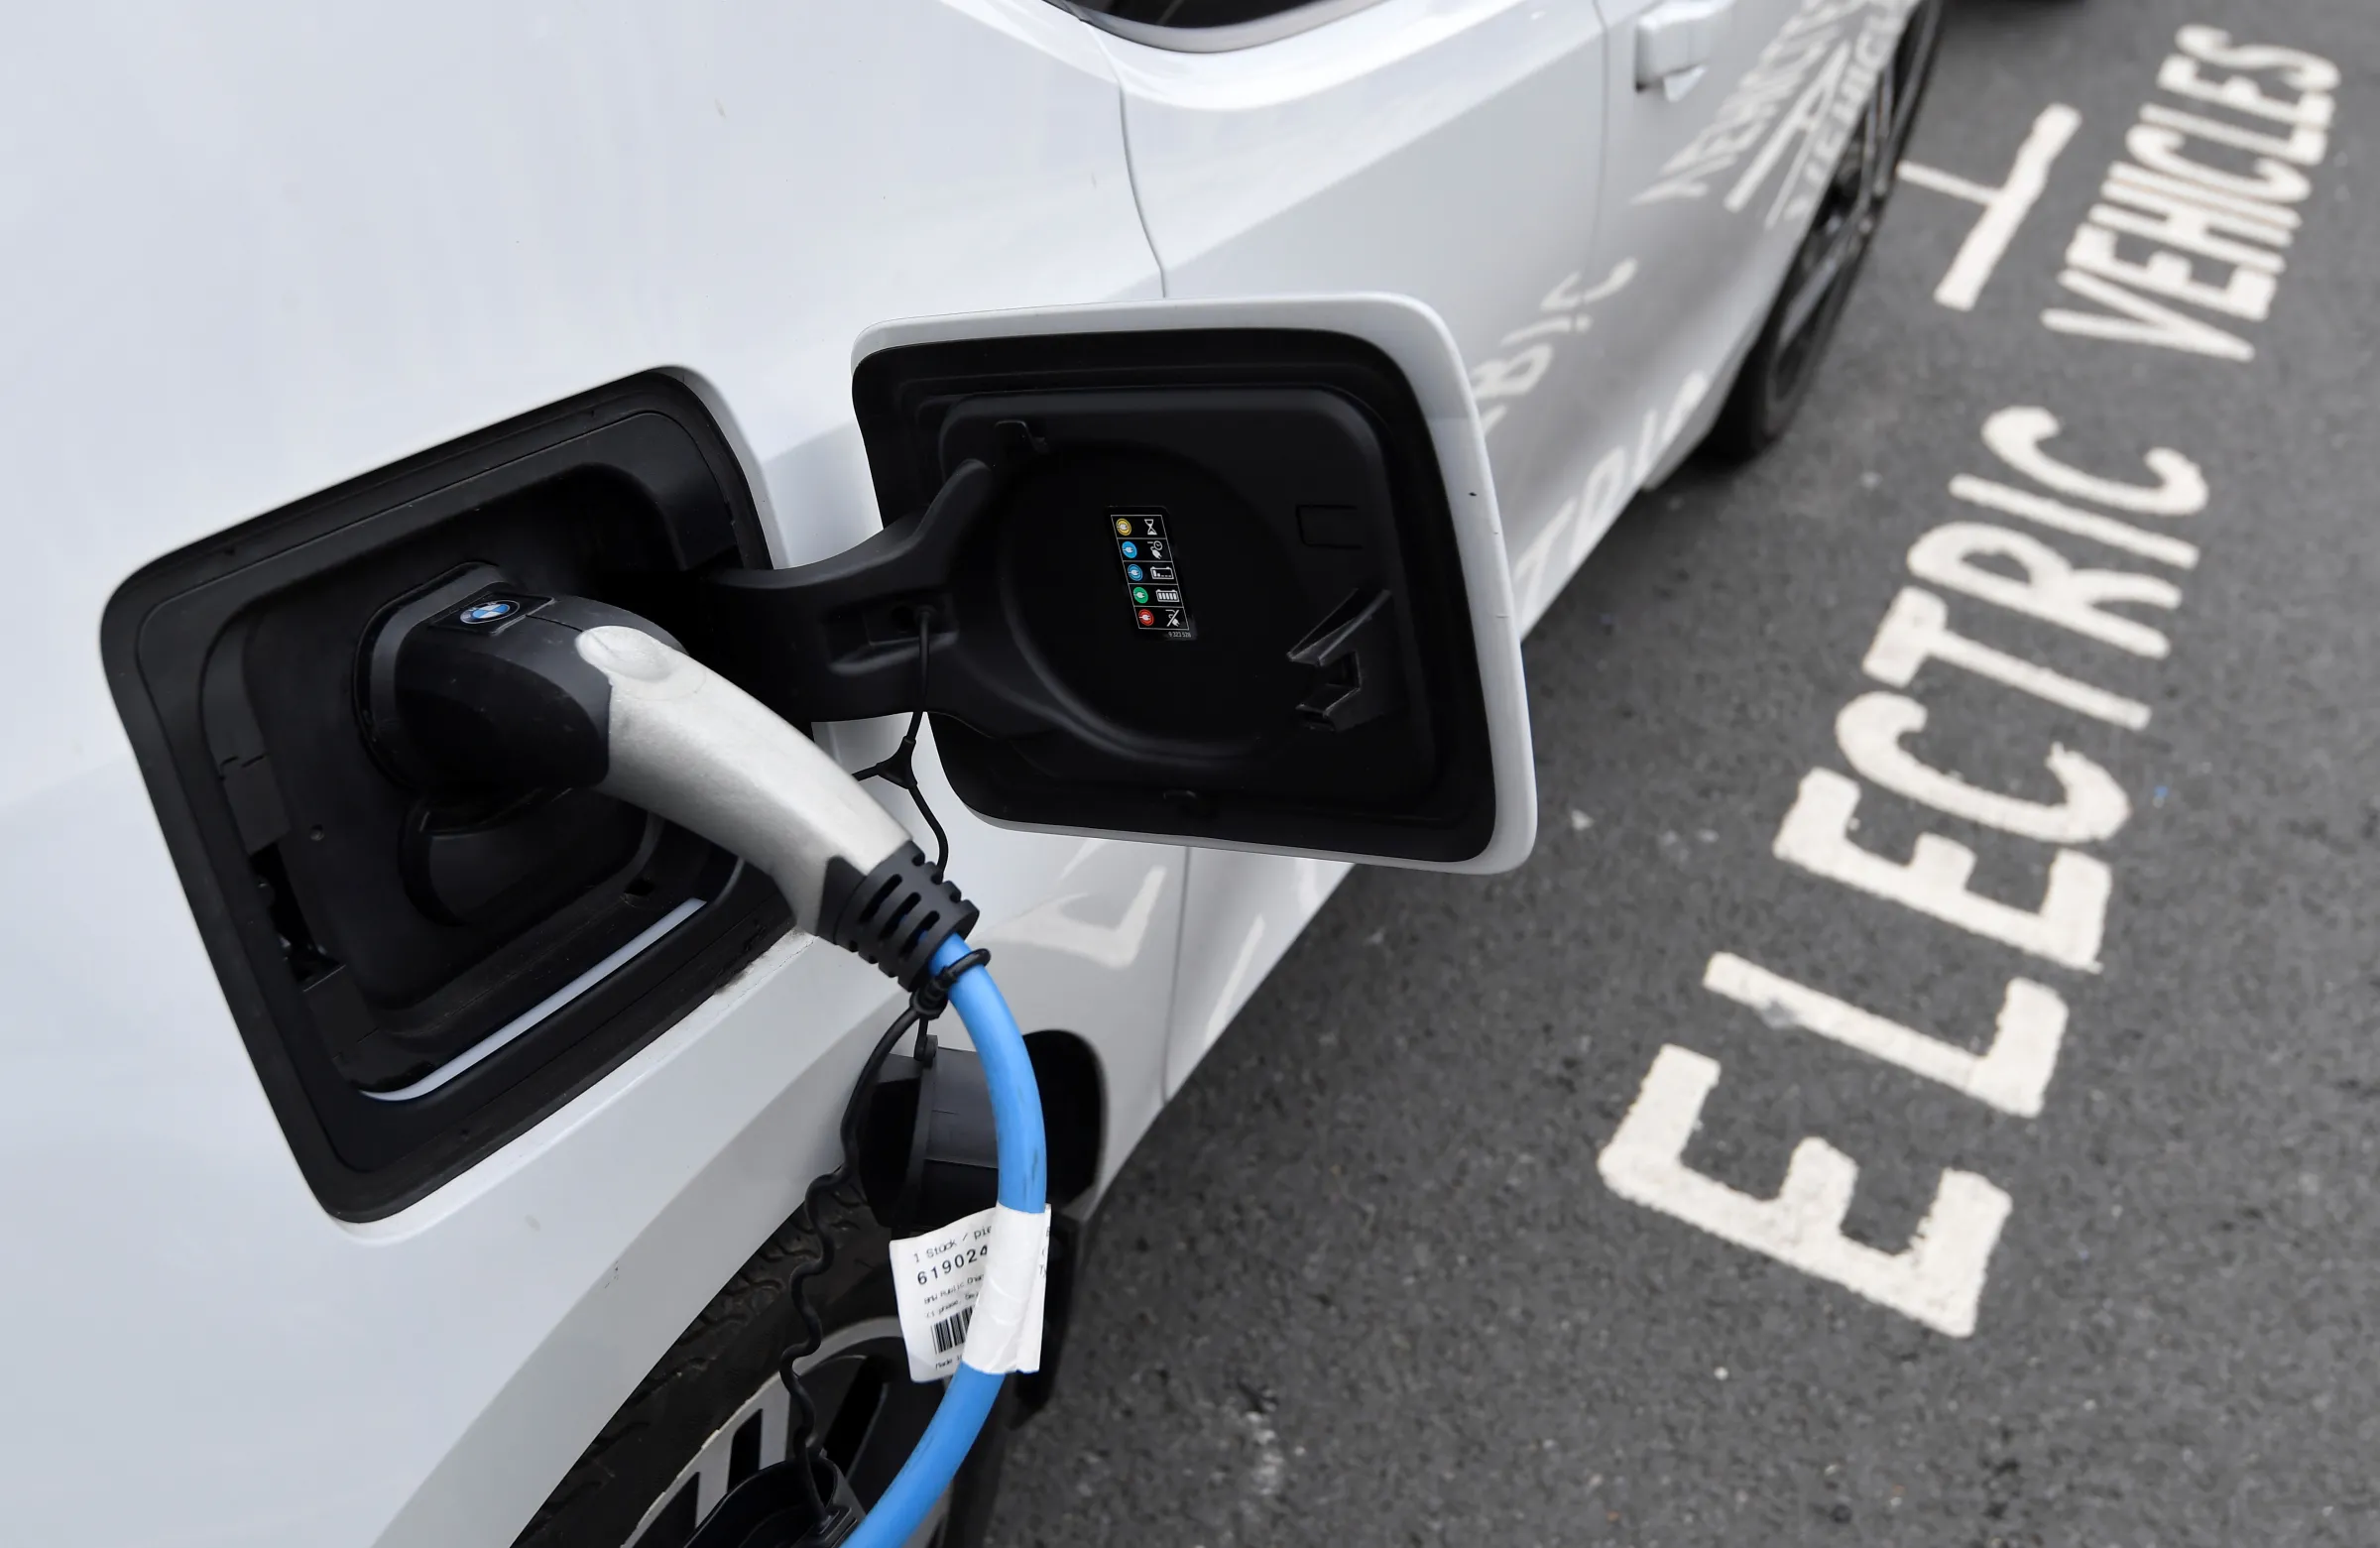 An electric car is charged at a roadside EV charge point, London, October 19, 2021